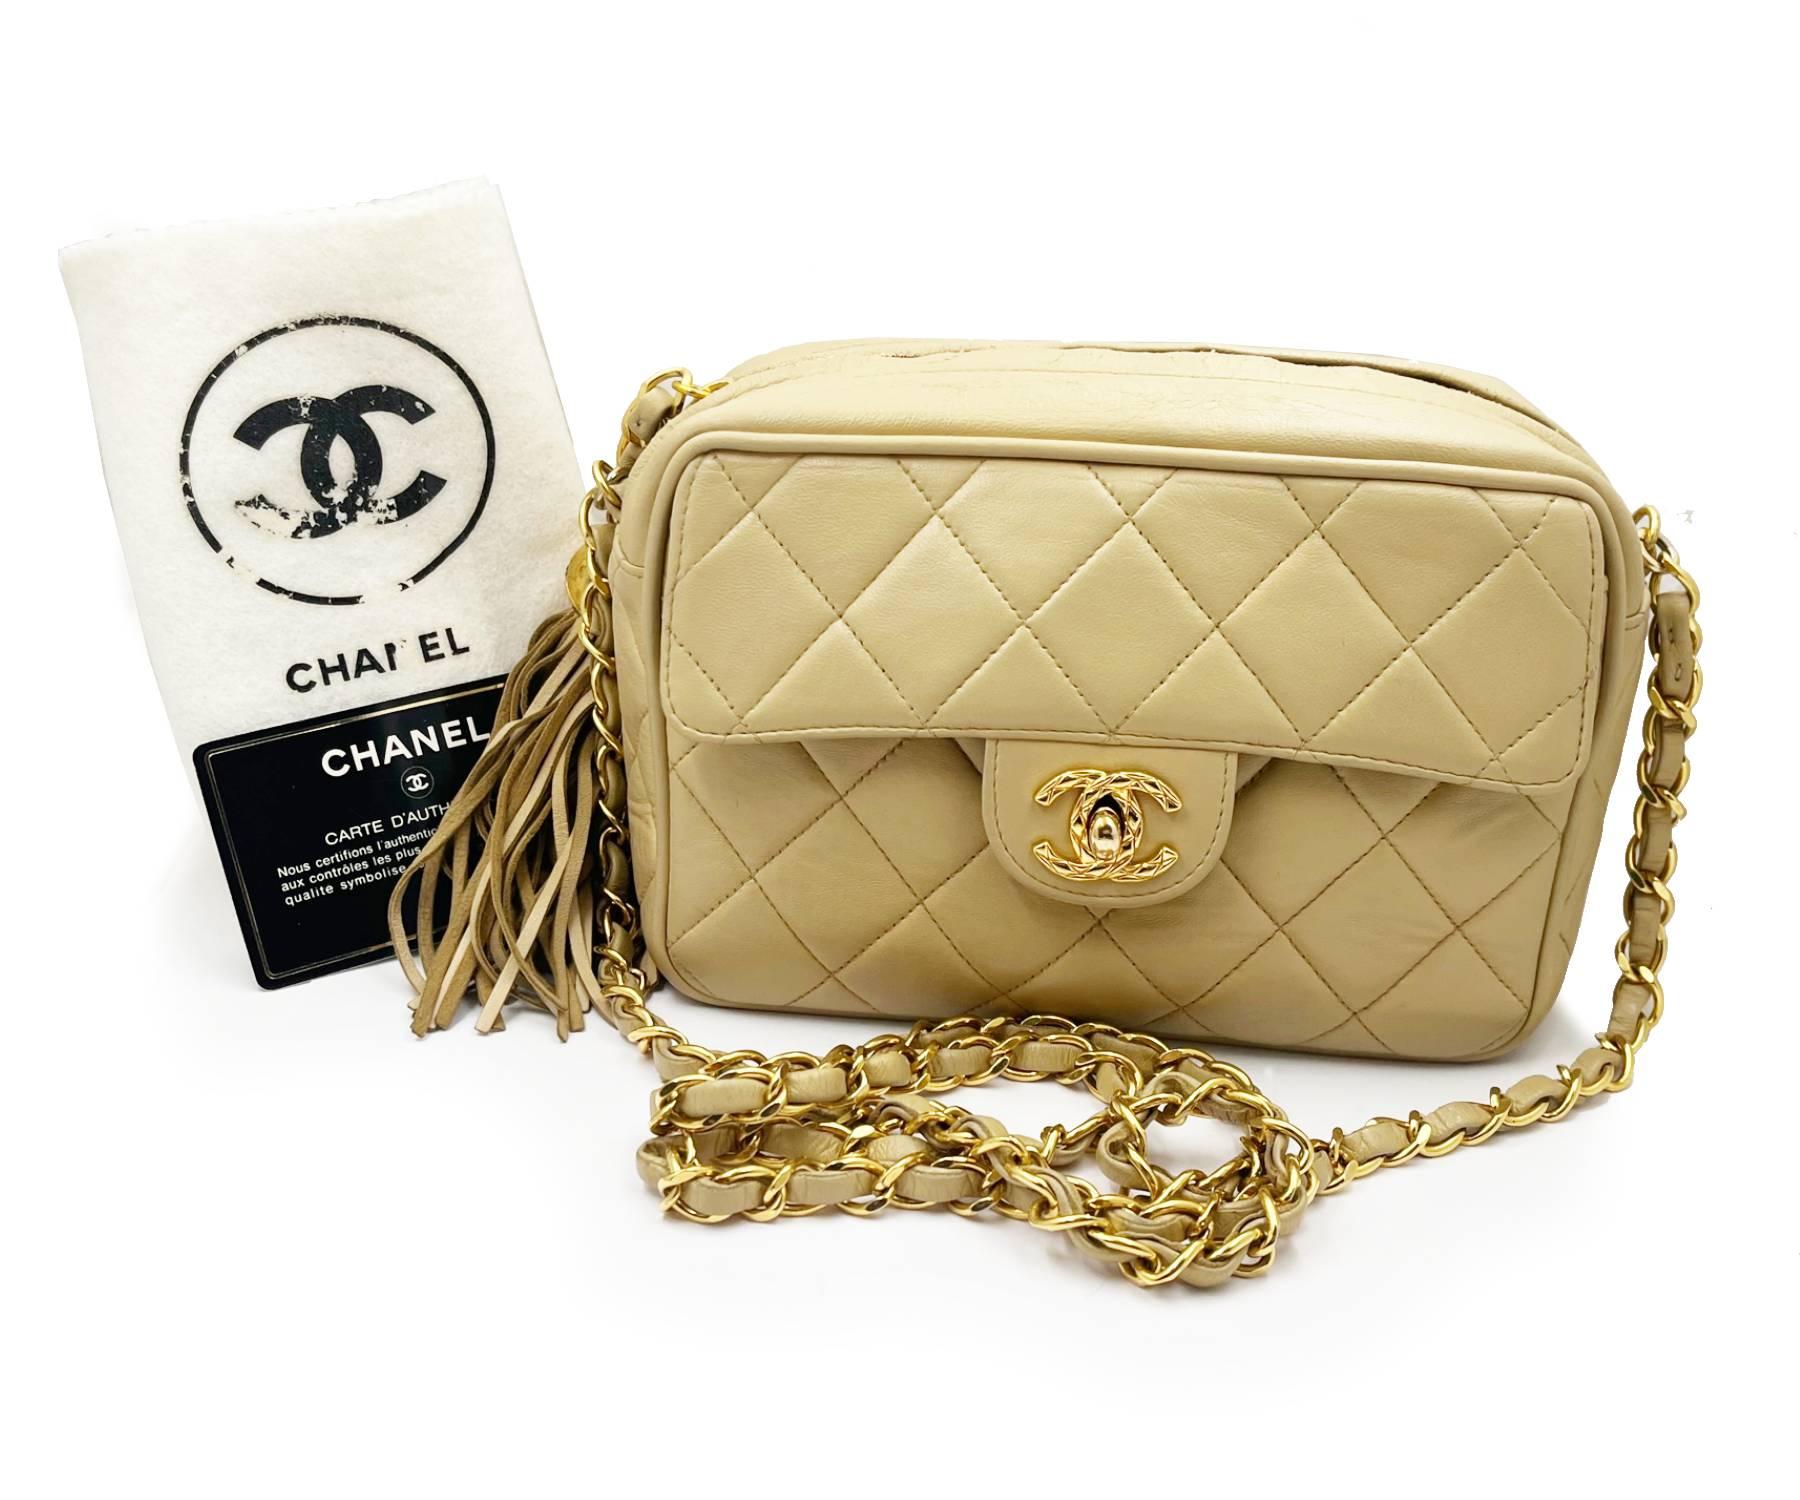 Chanel Vintage Beige Tassel Camera Small Cross Body Bag

* 270XXXX
* Made in France
* Comes with the control number card and dustbag

-It is approximately 7.5″ x 5″ x 3″.
-The drop of the chain is 20″.
-Corners are good.
-The leather of the zipper